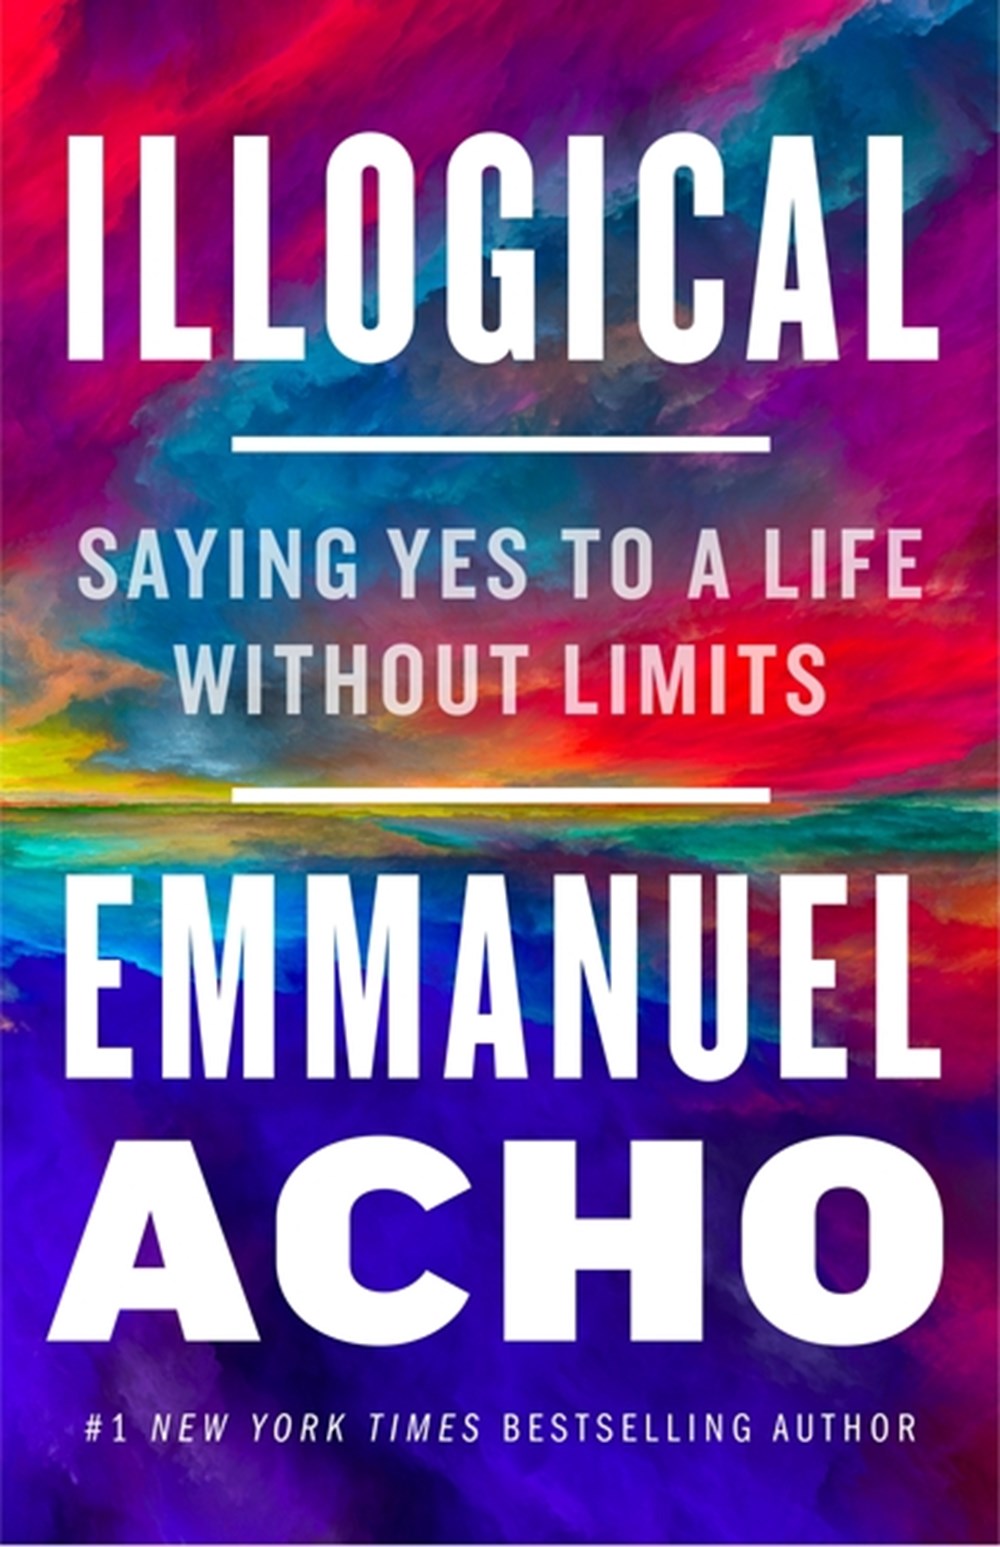 Illogical Saying Yes to a Life Without Limits